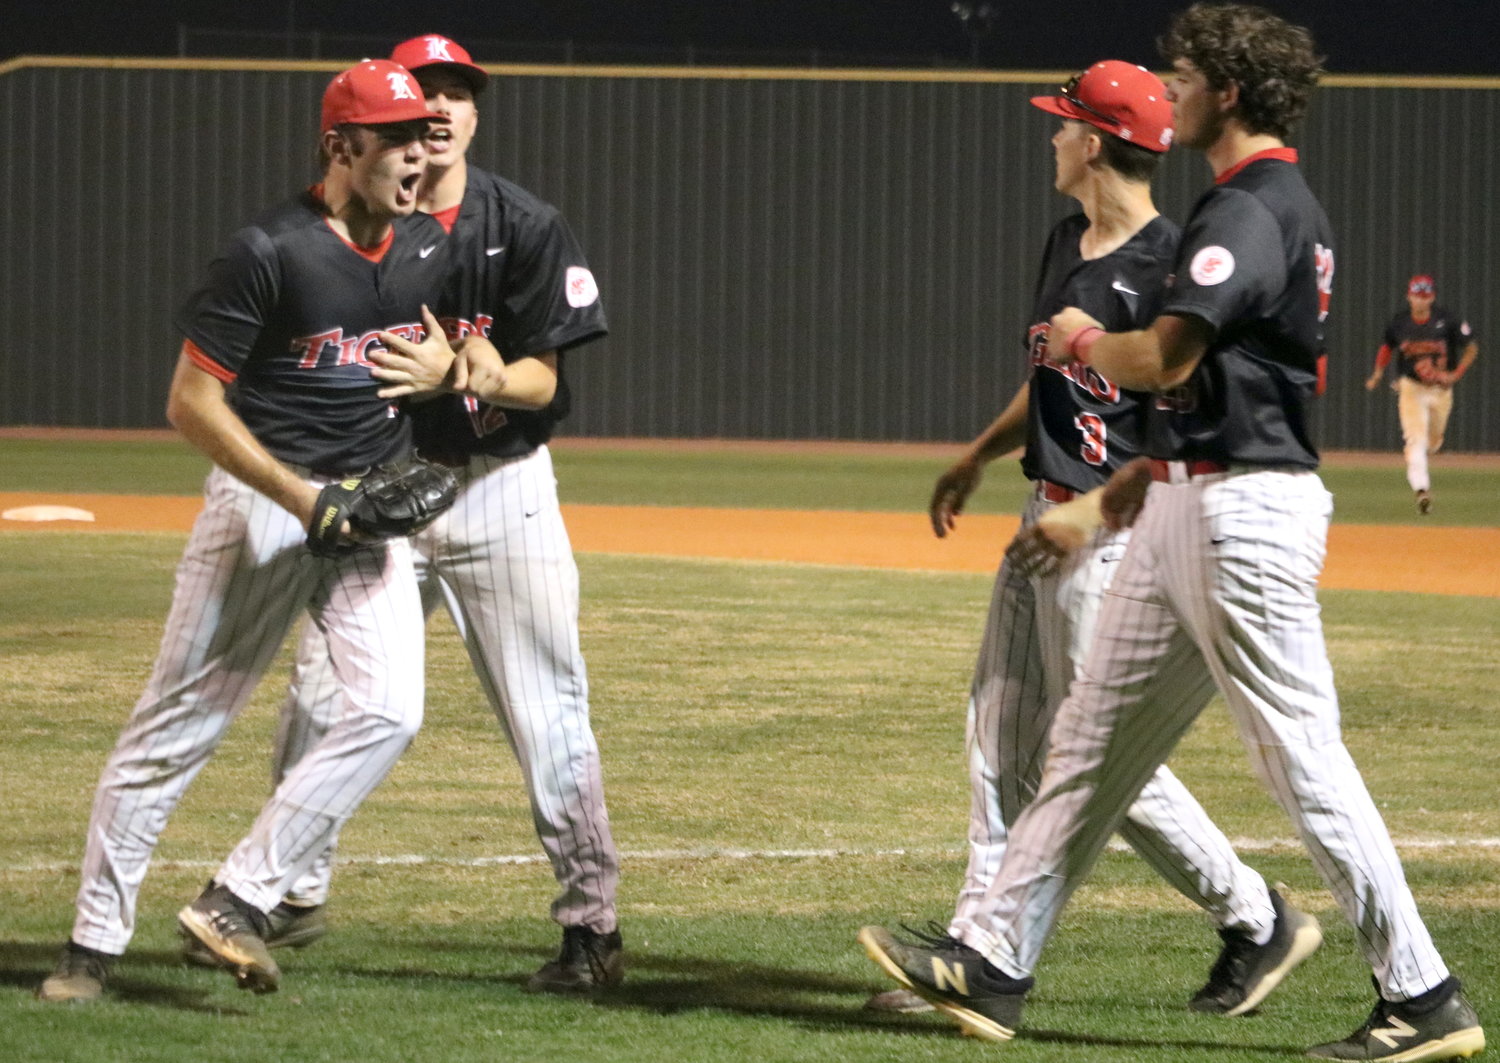 Brayden Powers celebrates after getting out of a jam during Tuesday’s District 19-6A game between Katy and Tompkins at the Tompkins baseball field.